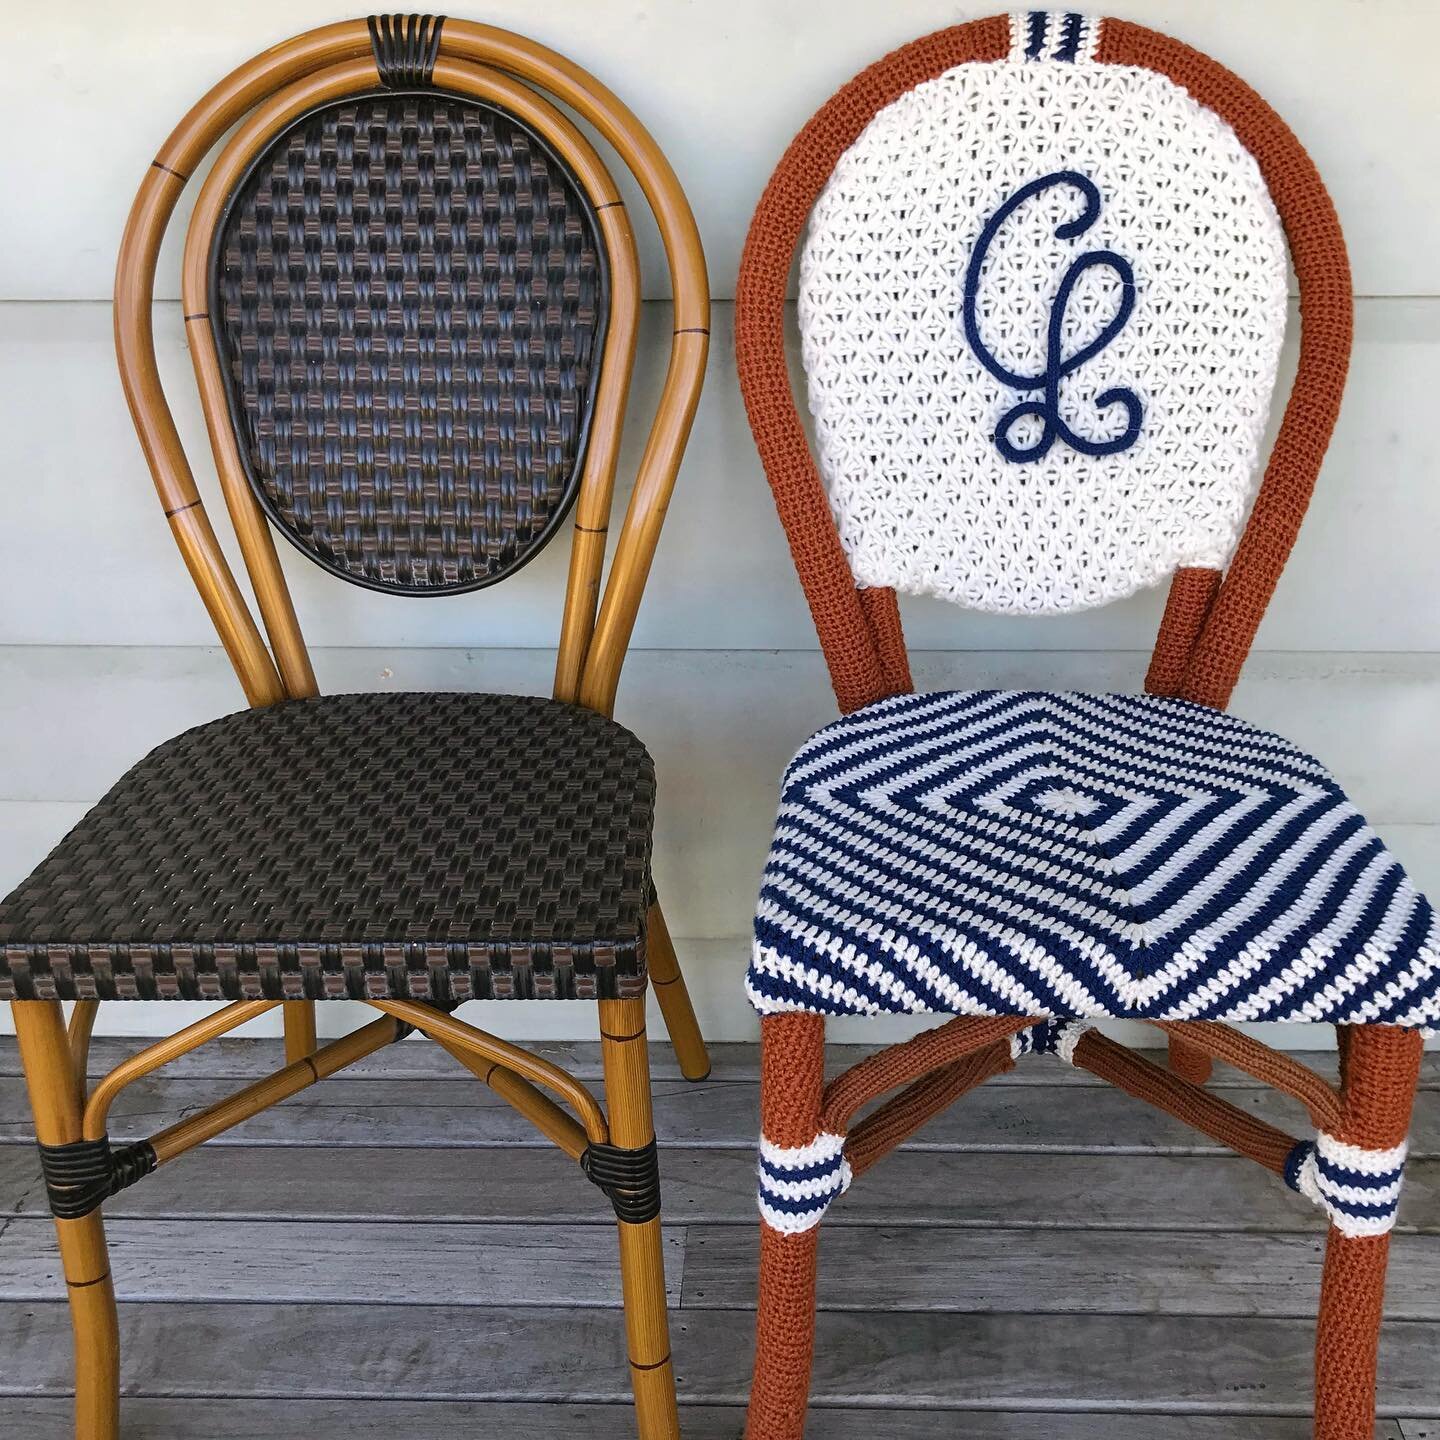 #Yarntopians cafe chair before and after! The CL monogram stands for Cafe de la Laine. You can see more photos of our @jumpersandjazzinjuly installation in previous posts.

💙🤍&hearts;️

#jumpersandjazz #jumpersandjazzinjuly #warwickqld #yarnbombing